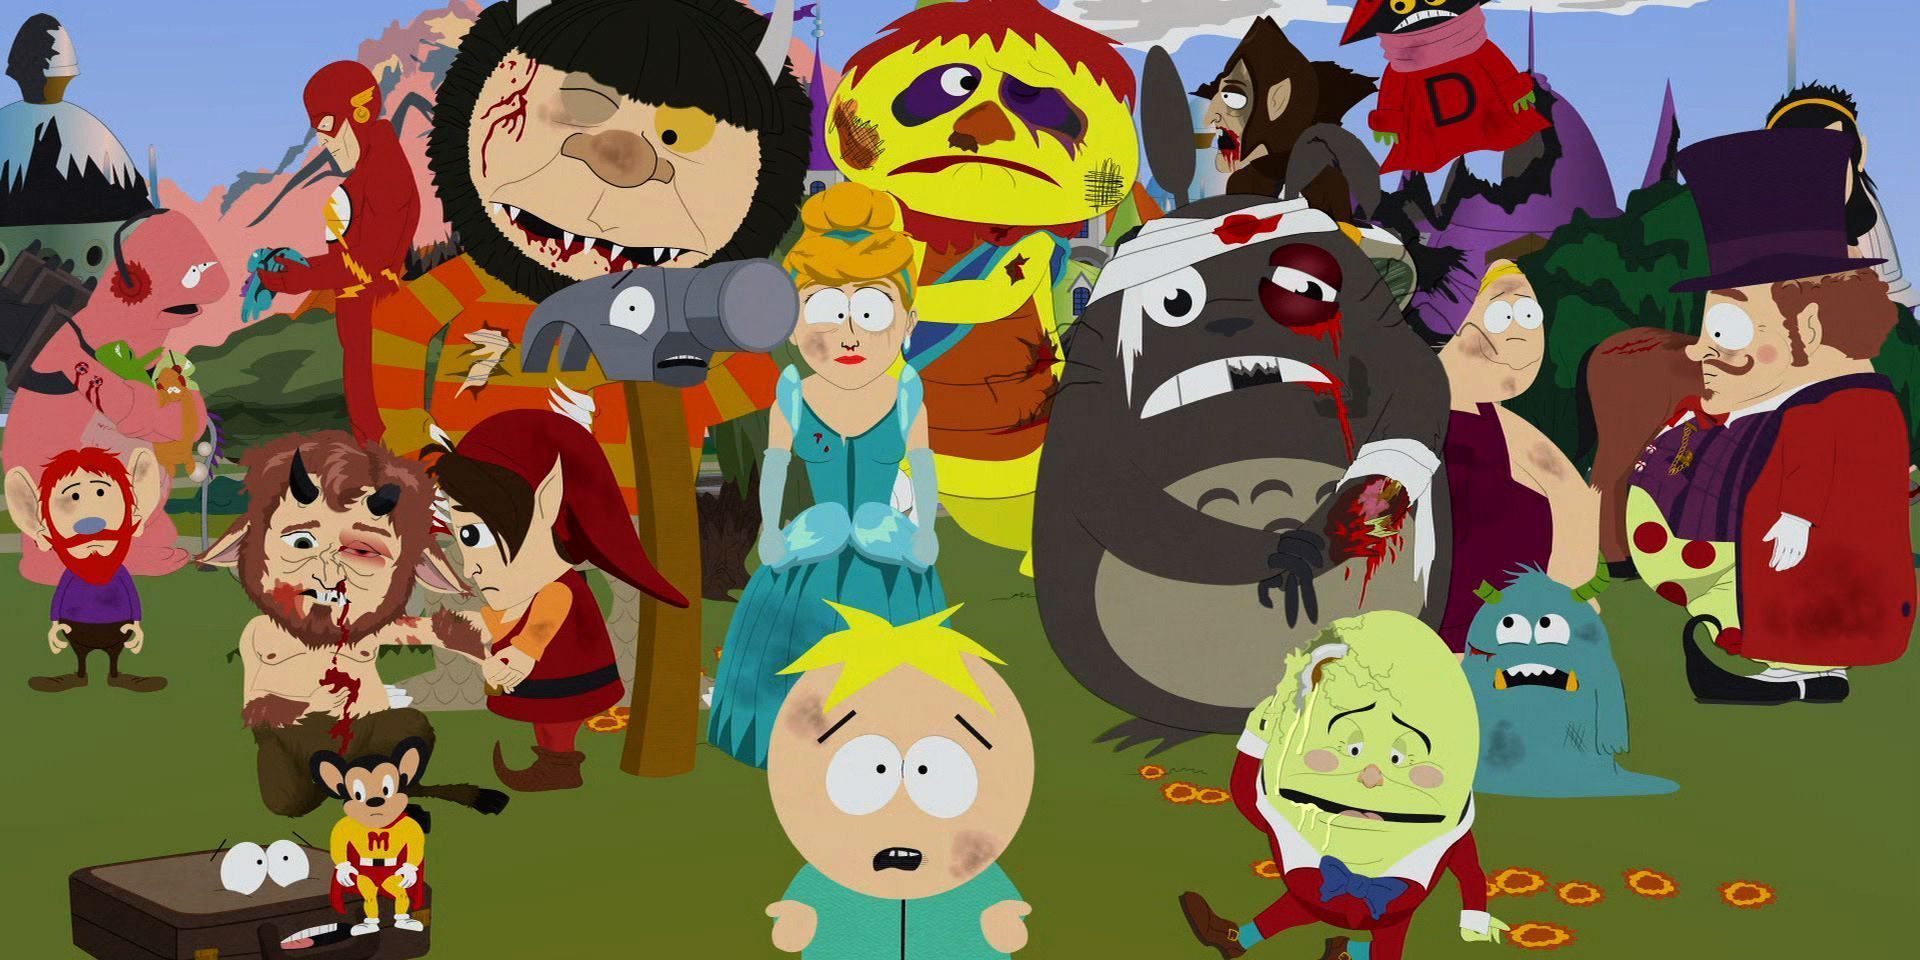 Butters runs away from a slew of fictional creatures in Imaginationland in South Park